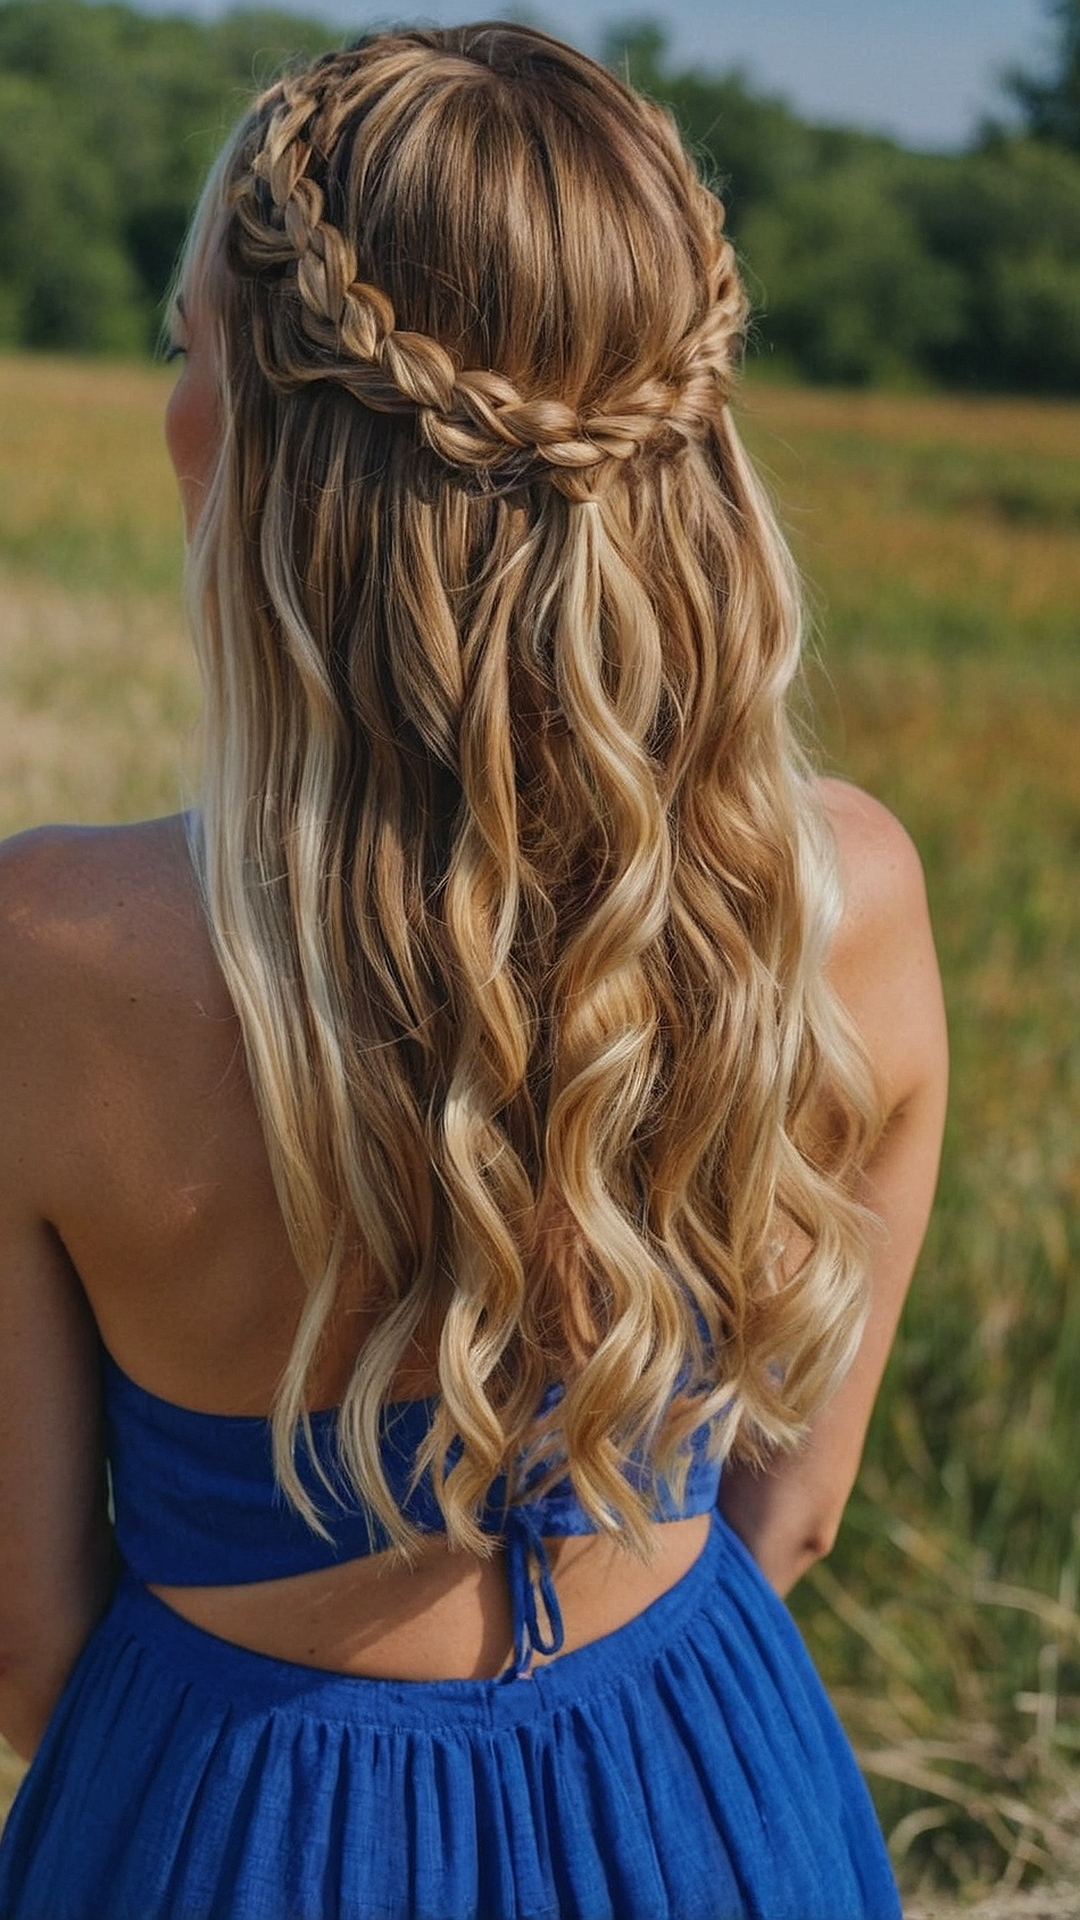 Palm Tree Princess: Summer Hairstyles Fit for Royalty